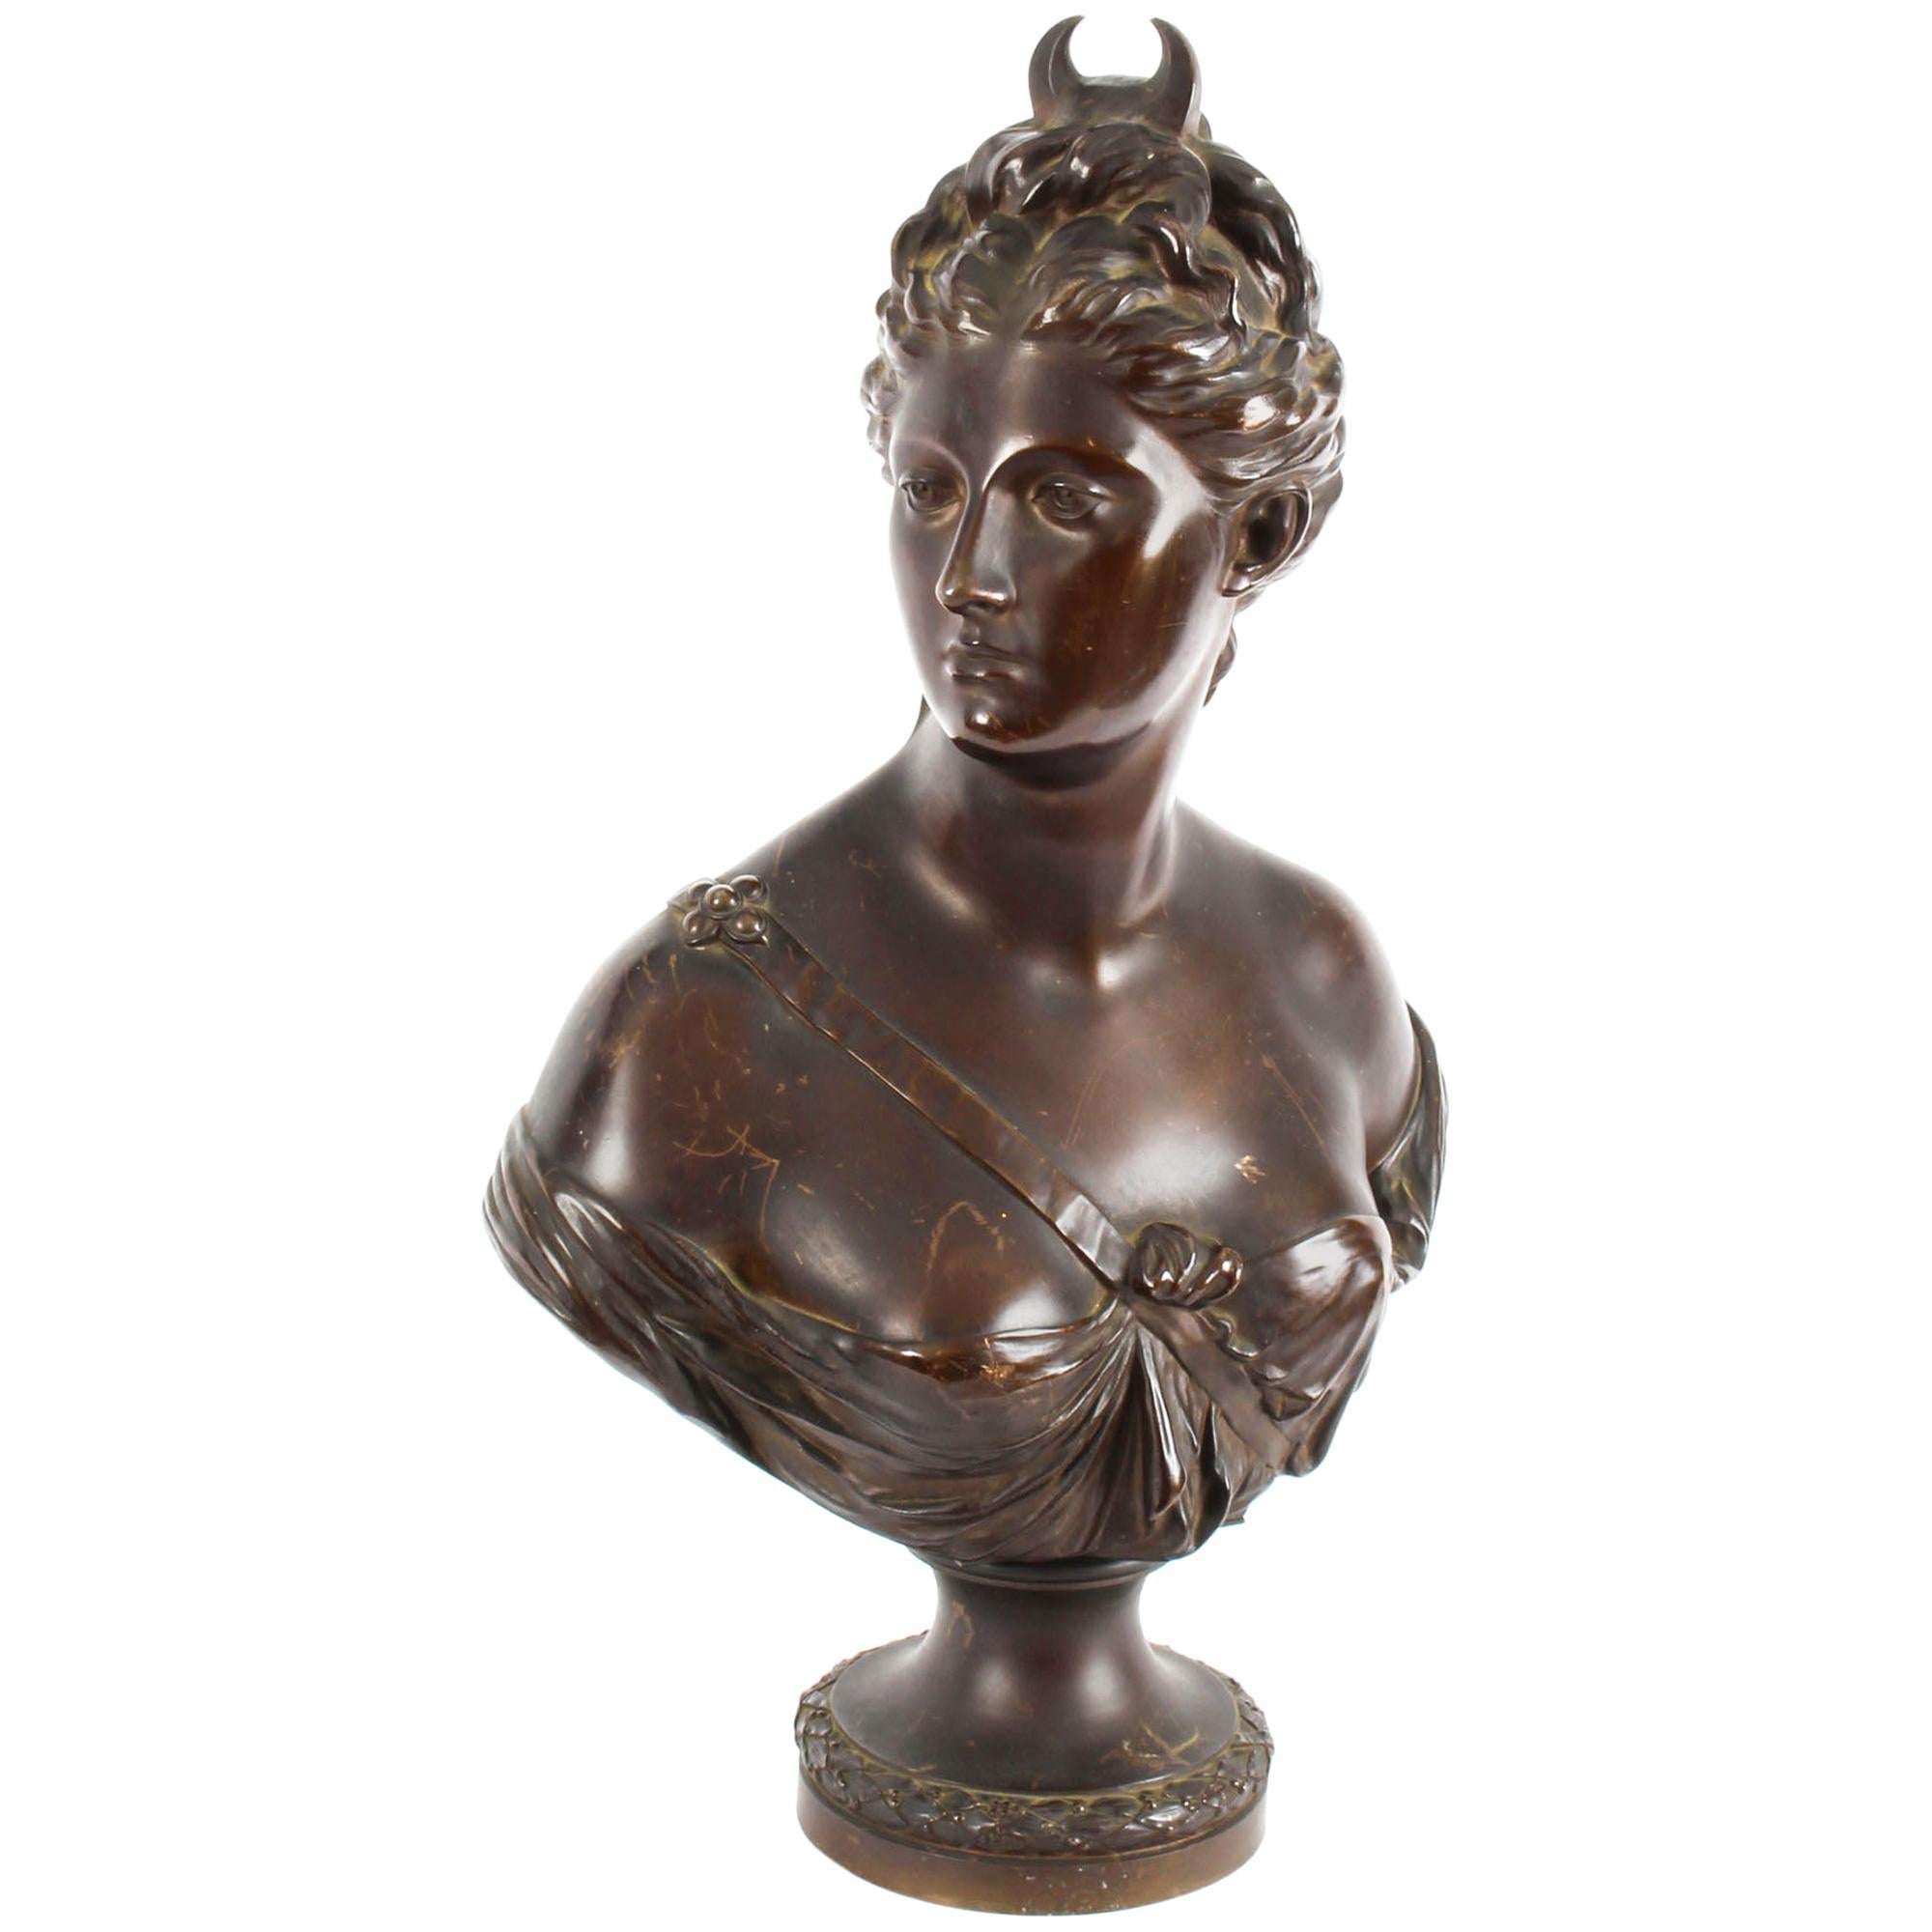 Antique Sculpted Polished Bronze Bust of the Roman Goddess Diana, 19th Century